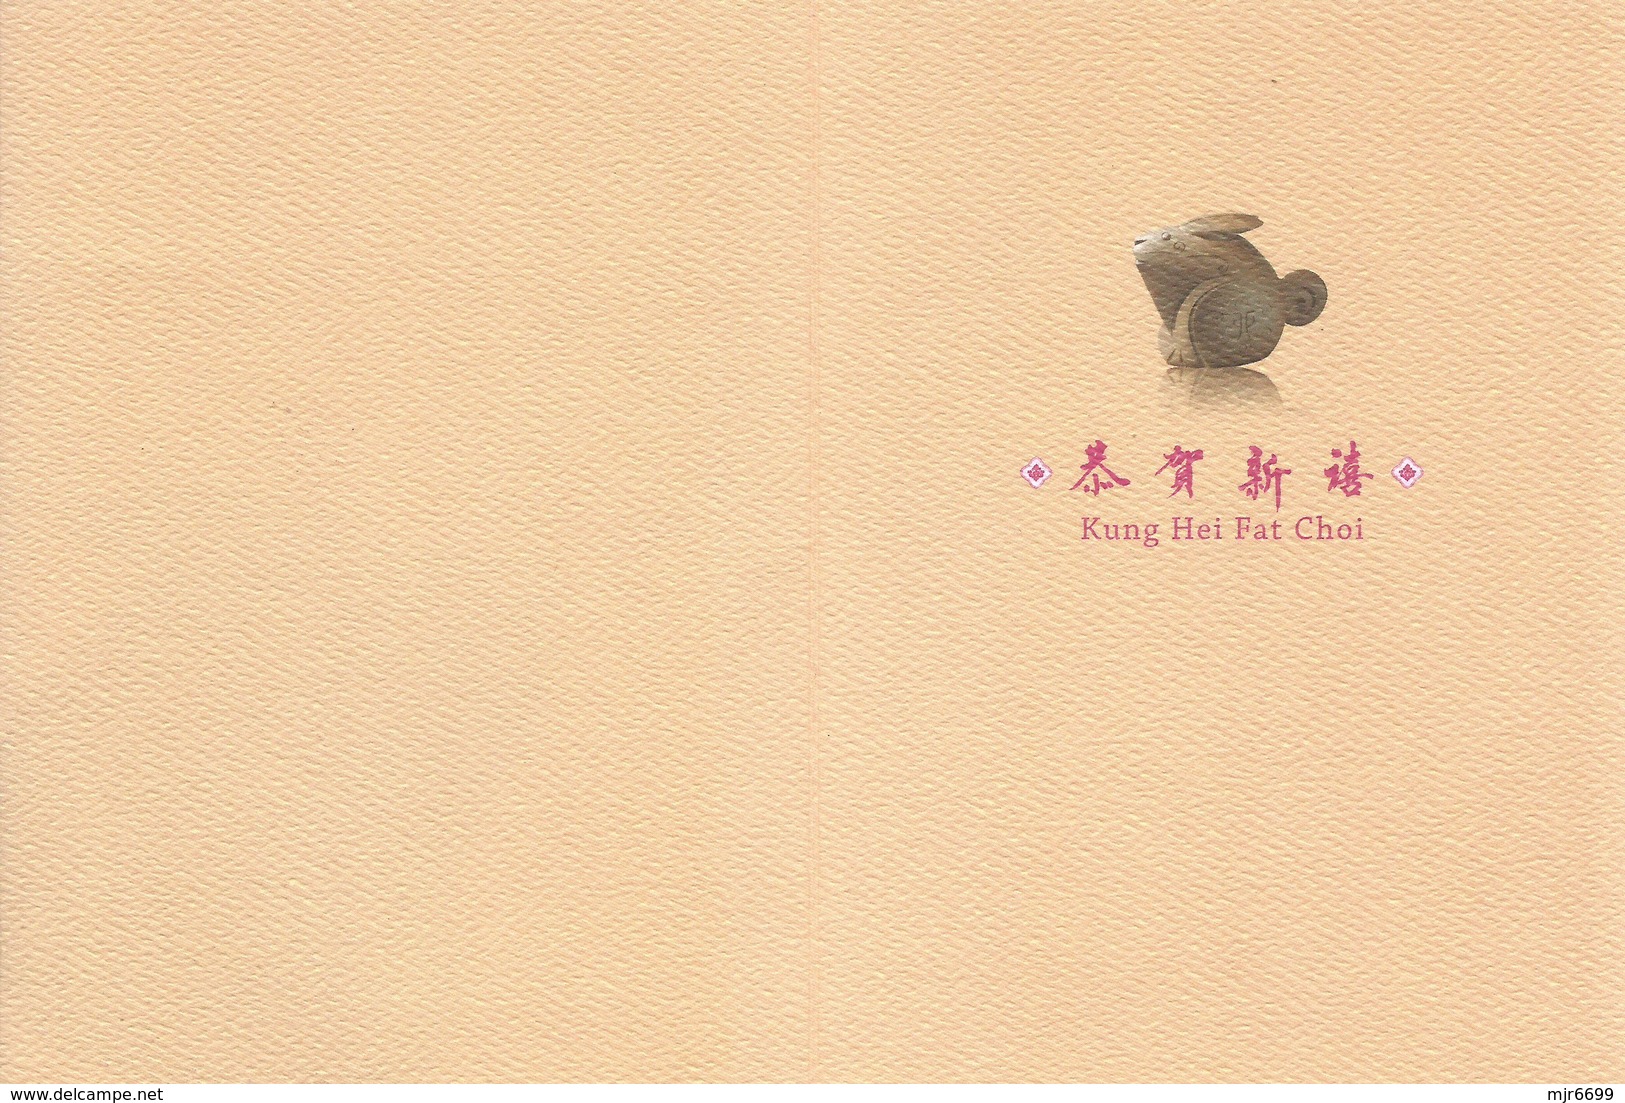 MACAU 2011 LUNAR YEAR OF THE RABBIT GREETING CARD & POSTAGE PAID COVER 1ST DAY USE WITH AREIA PRETA CDS - Enteros Postales